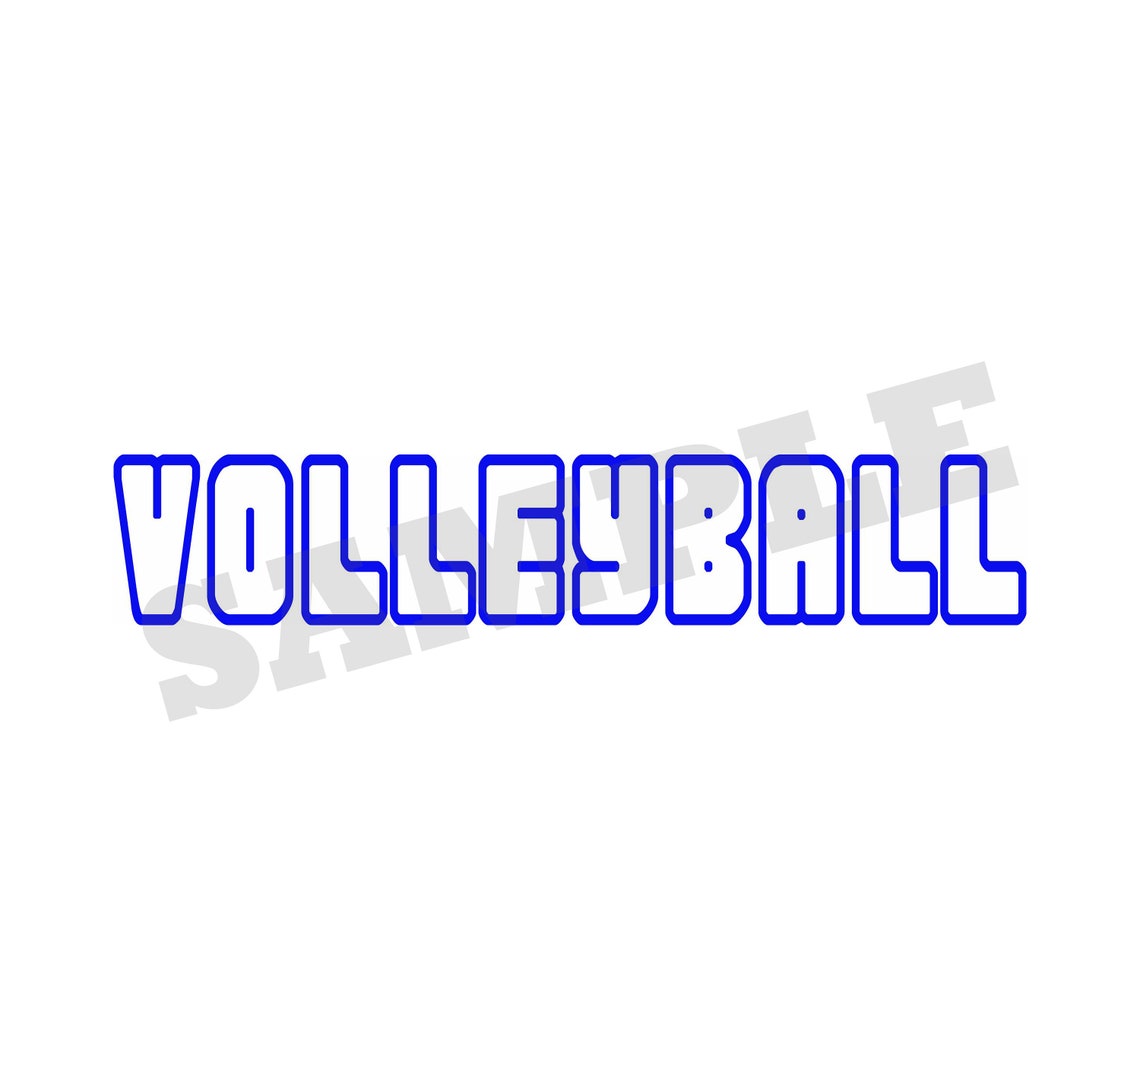 Volleyball Open Letters SVG DXF Graphic Art Cut Files | Etsy